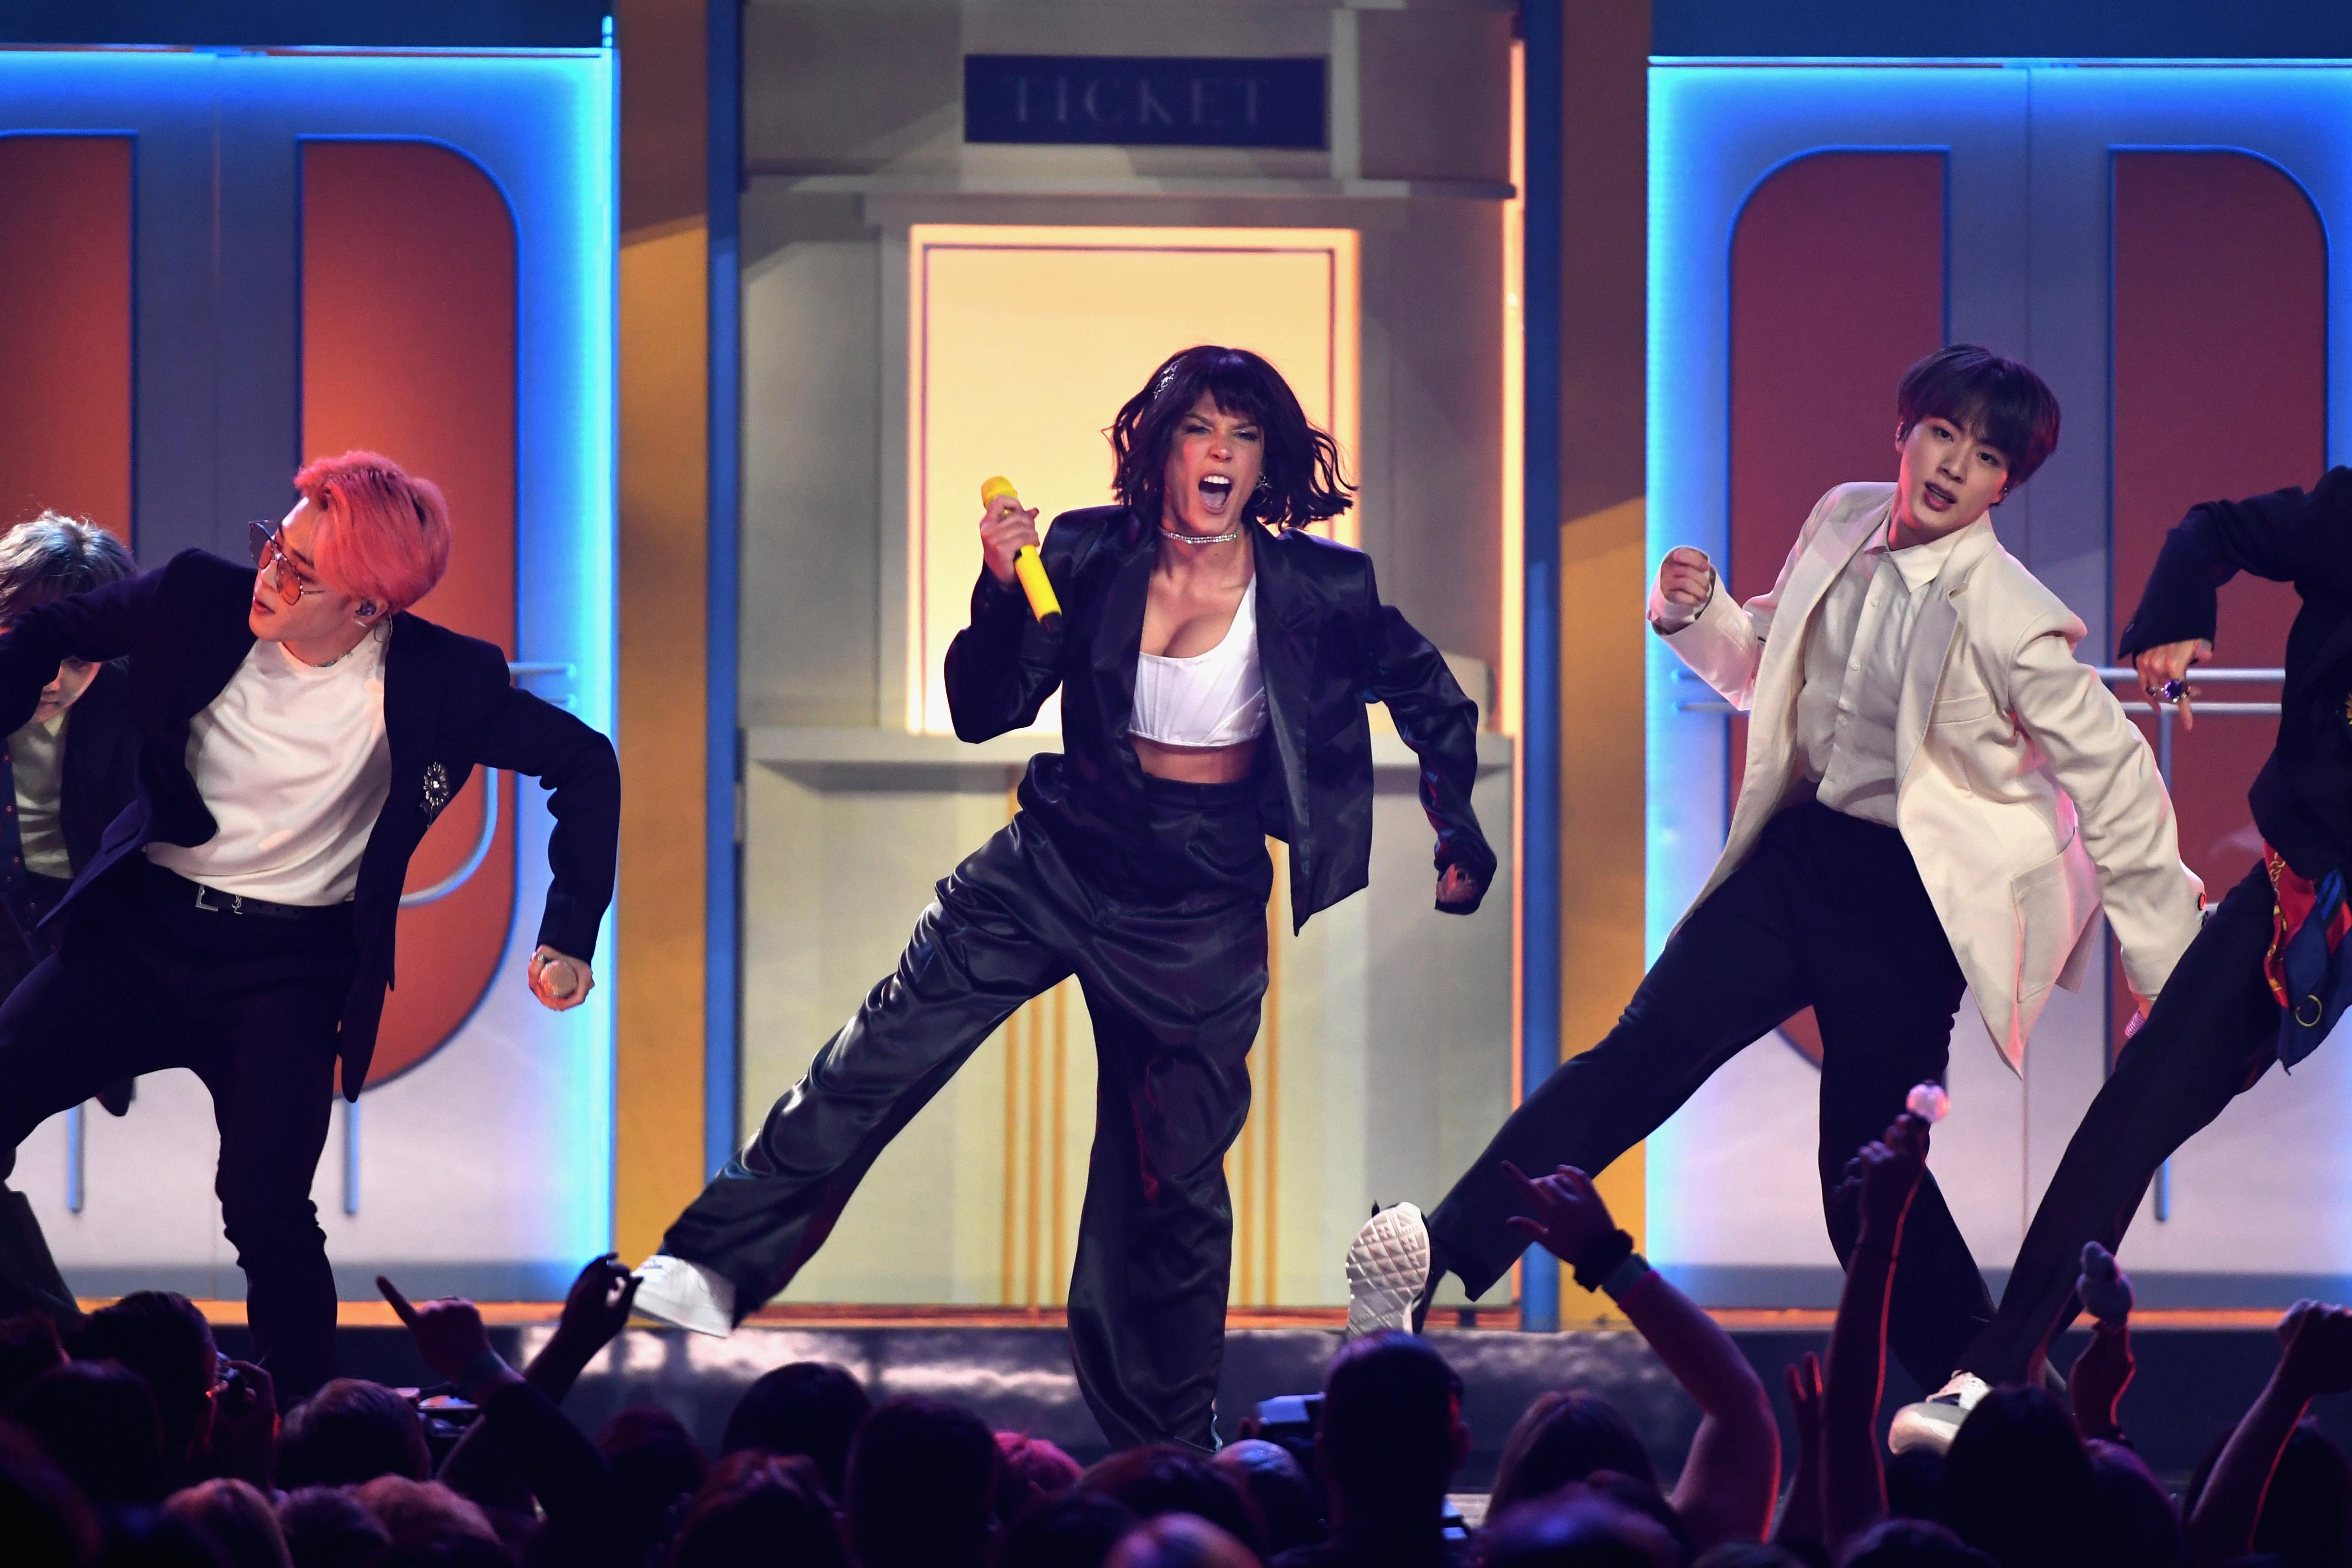 Halsey and BTS Perform 'Boy With Luv' at 2019 Billboard Music Awards